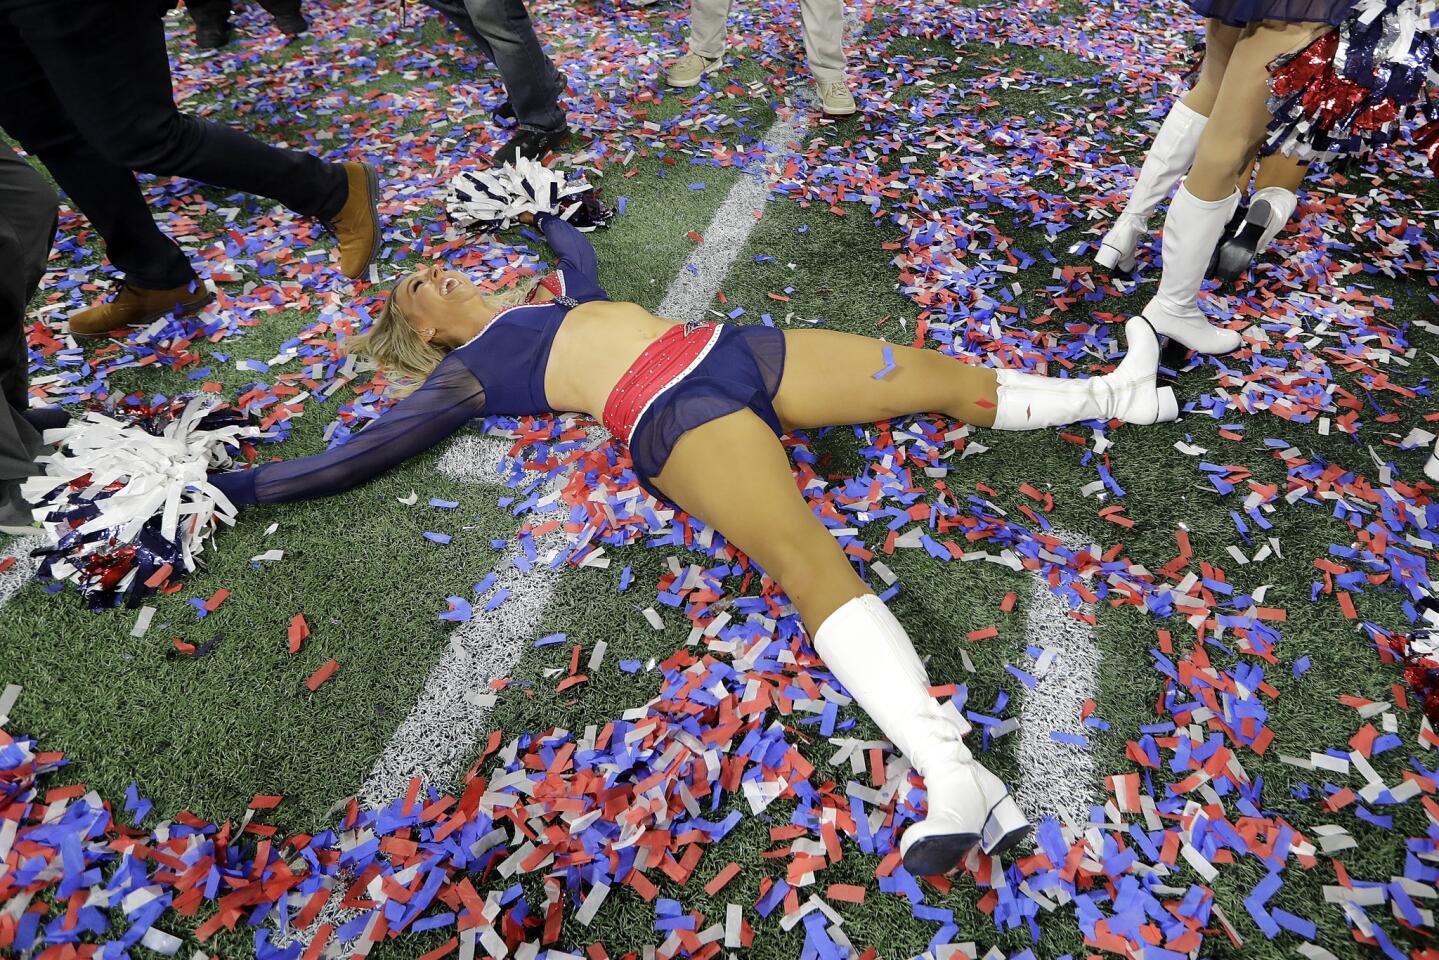 A New England Patriots cheerleader celebrates after the NFL Super Bowl 53 football game between the Los Angeles Rams and the Patriots Sunday, Feb. 3, 2019, in Atlanta. The Patriots won 13-3.